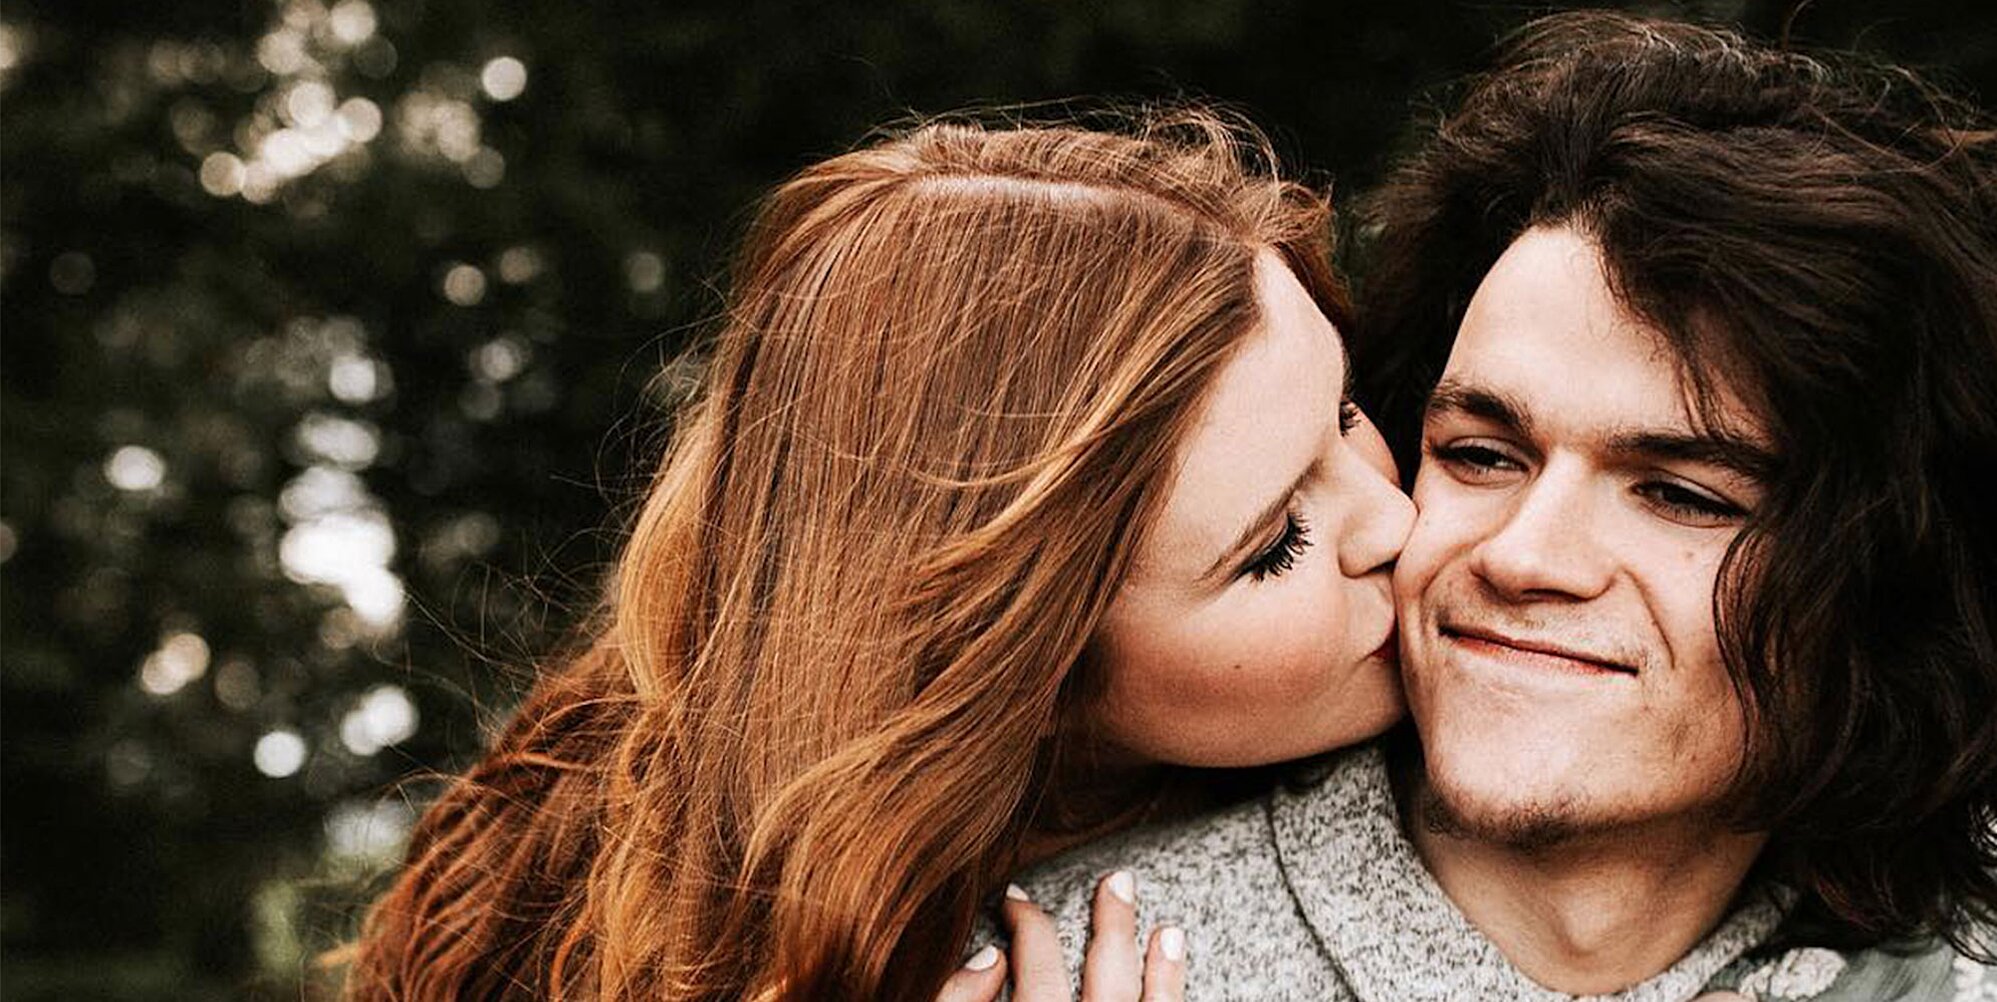 Isabel Roloff Pregnant Her Plans Could Put Her Unborn Baby in Danger Asks Instagram For Advice!